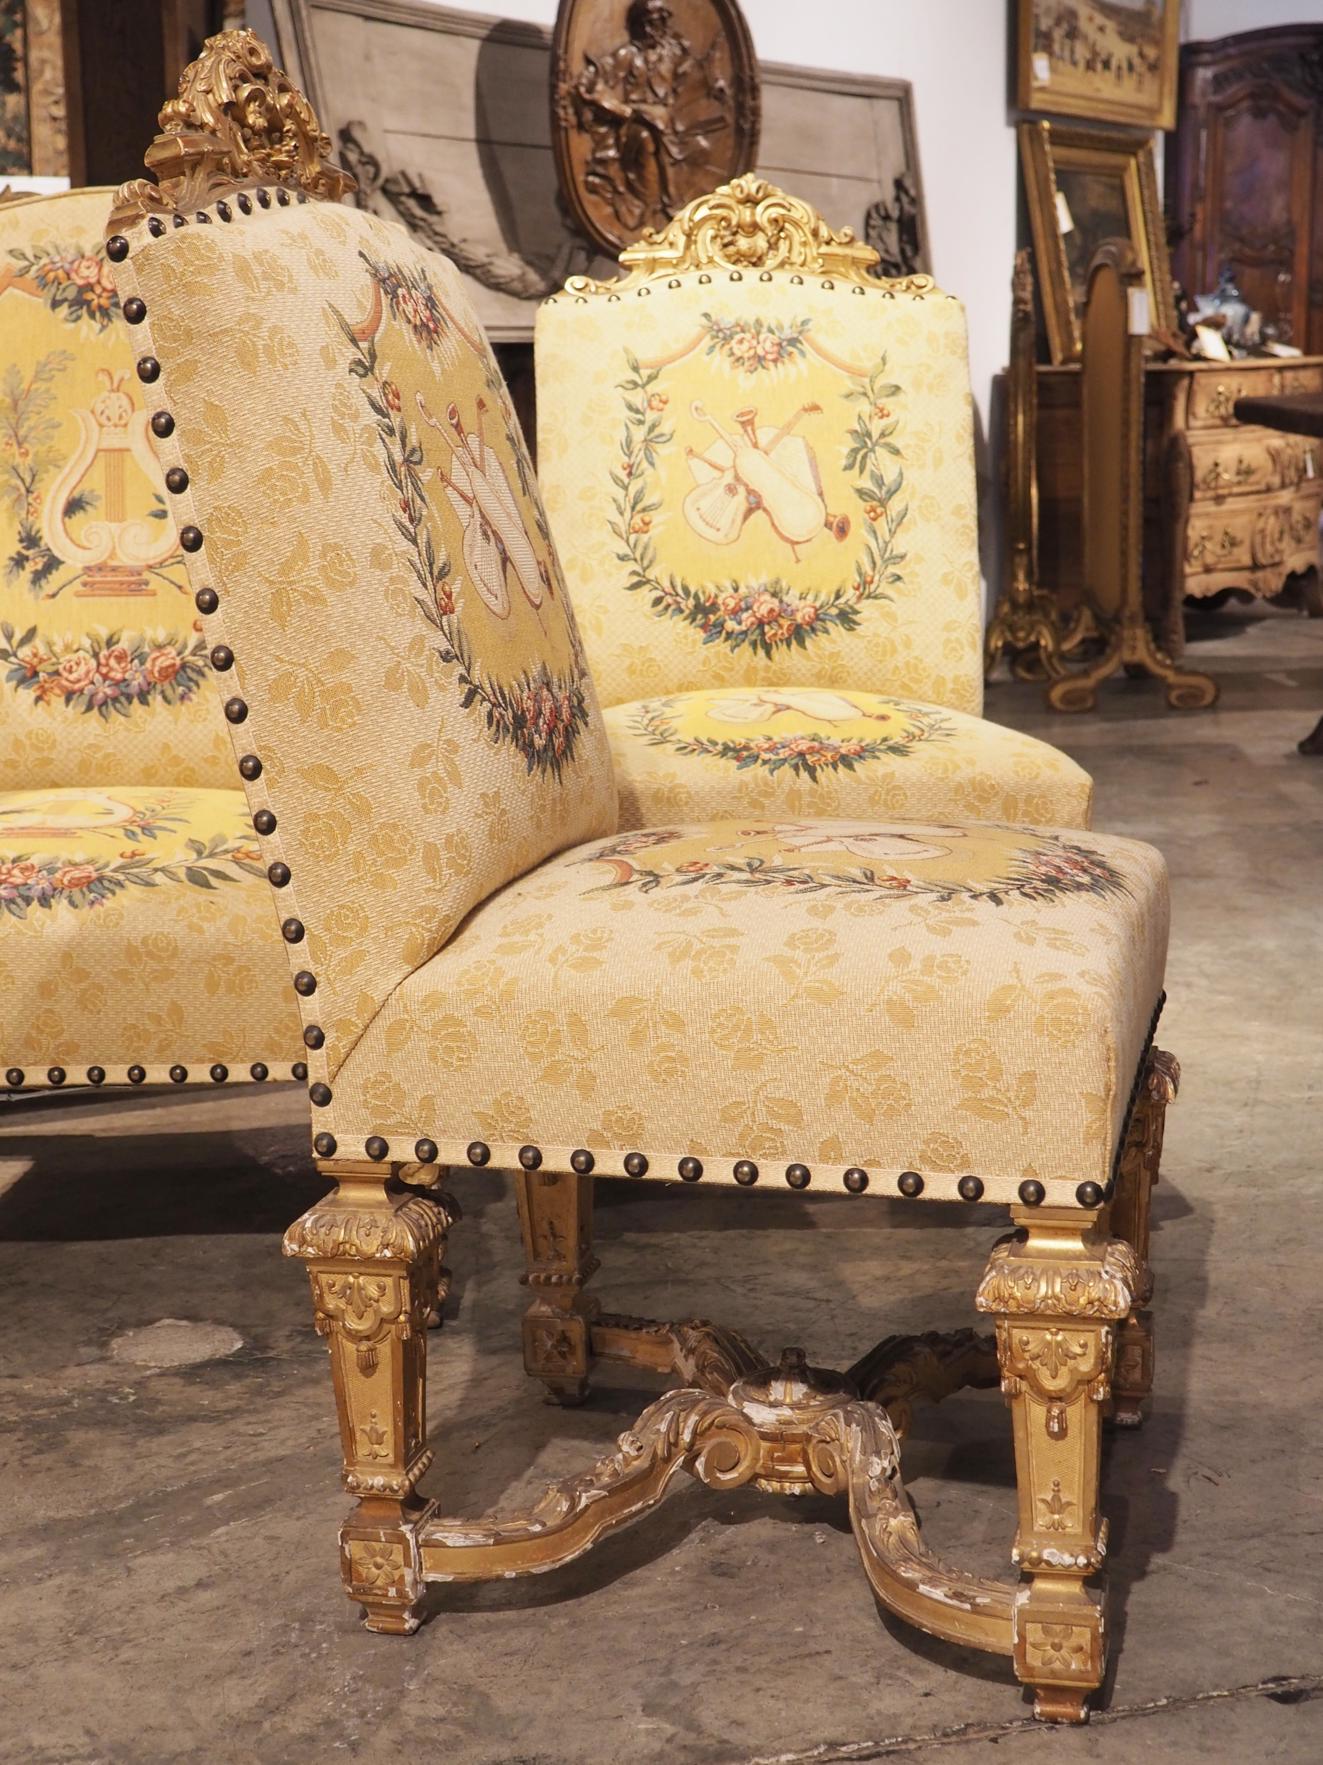 A Louis XIV style suite of giltwood seat furniture, mid-19th